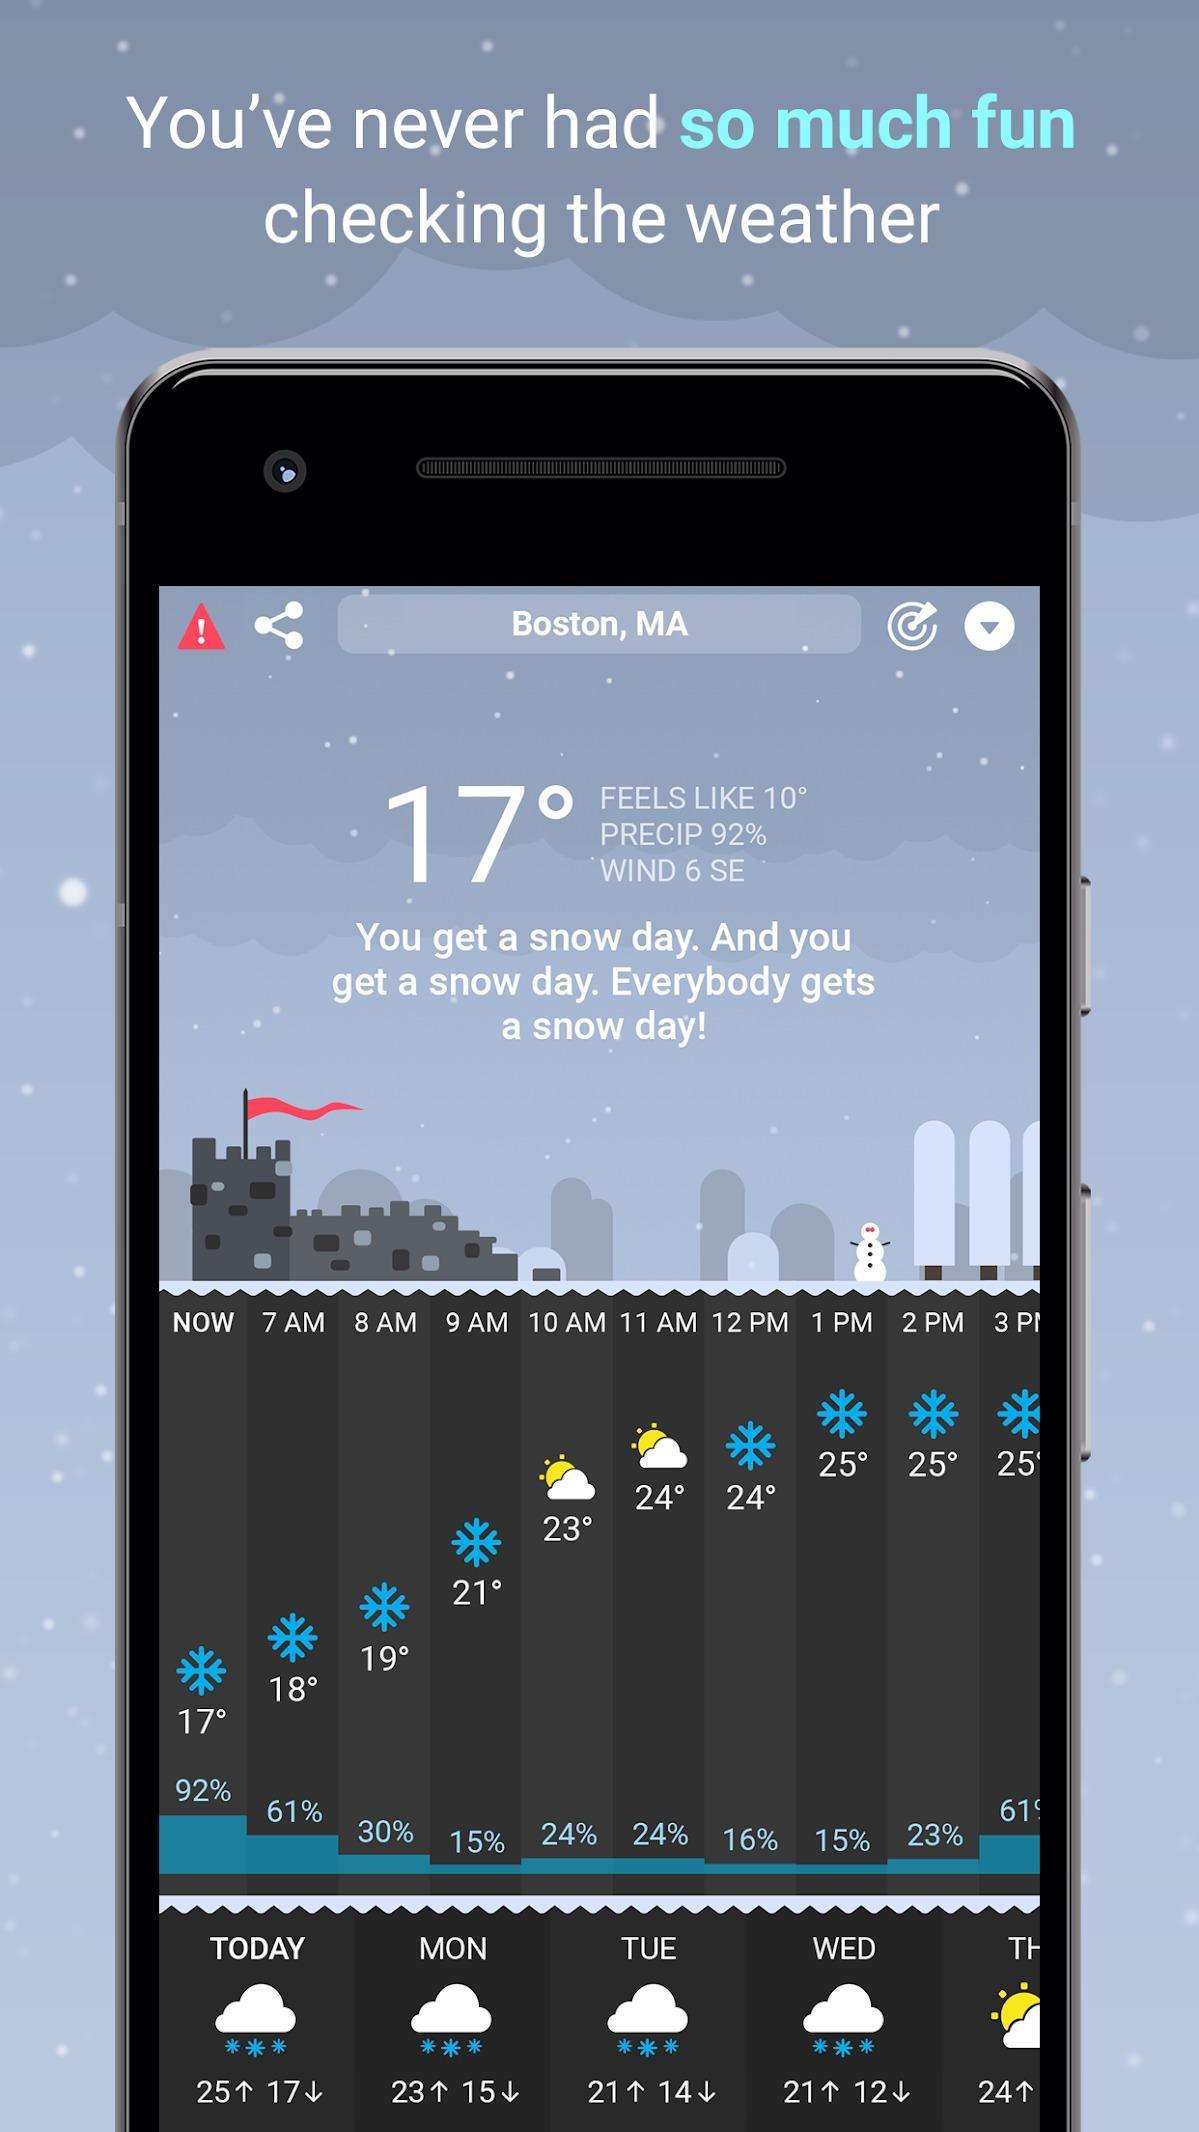 carrot weather update